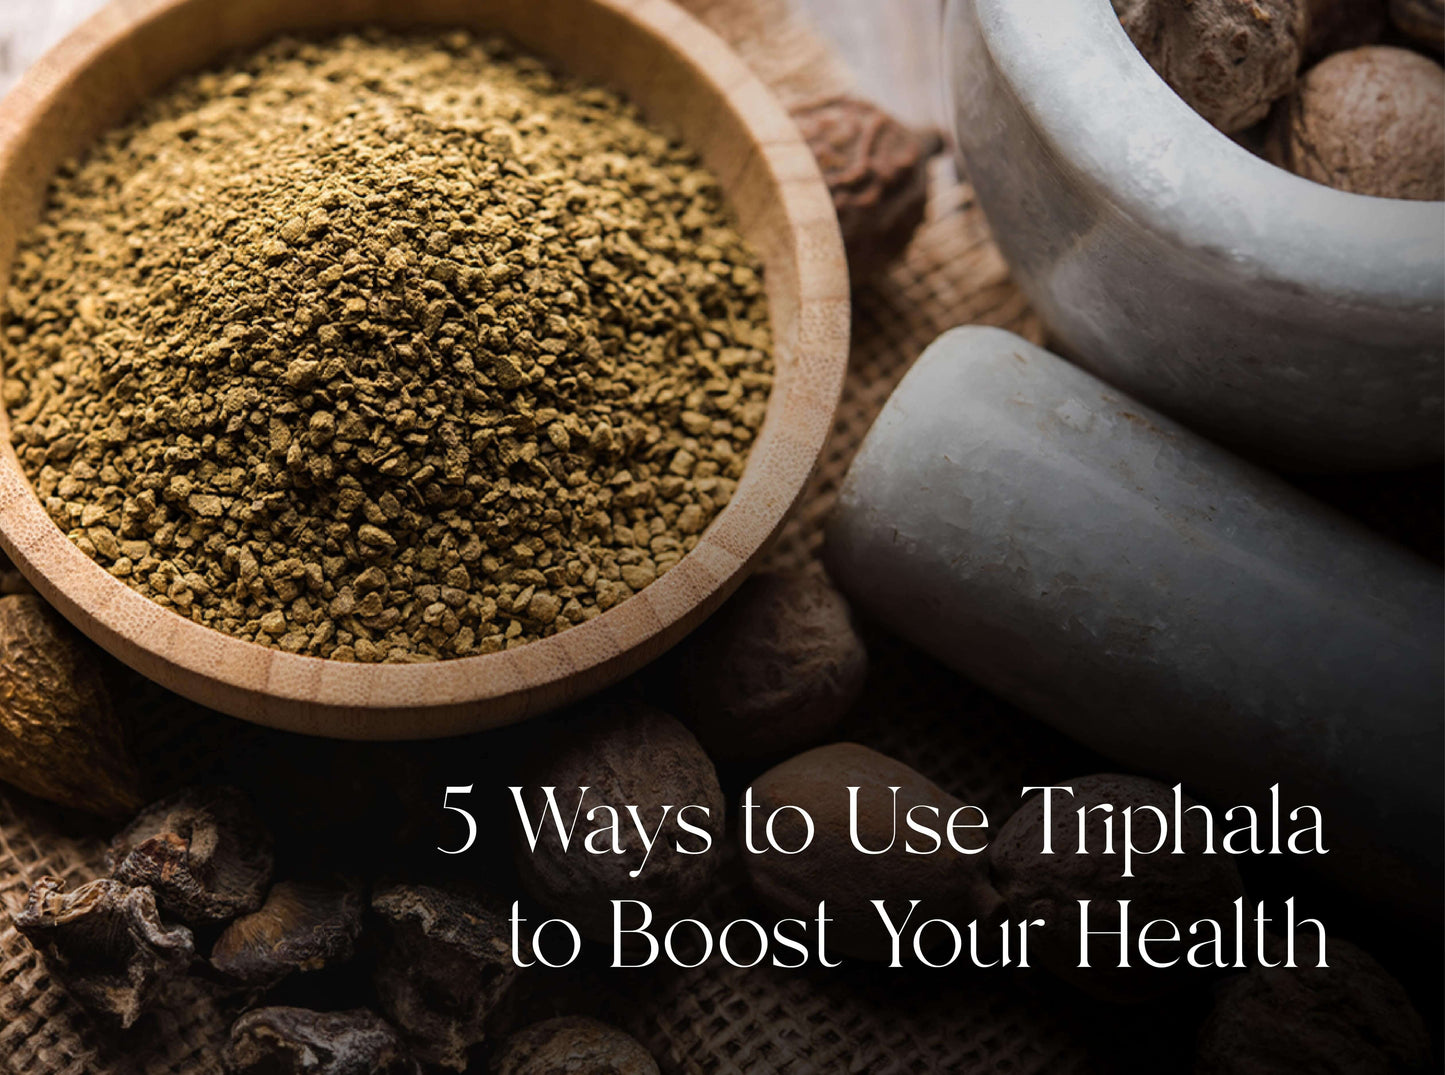 5 Ways to Use Triphala to Boost Your Health